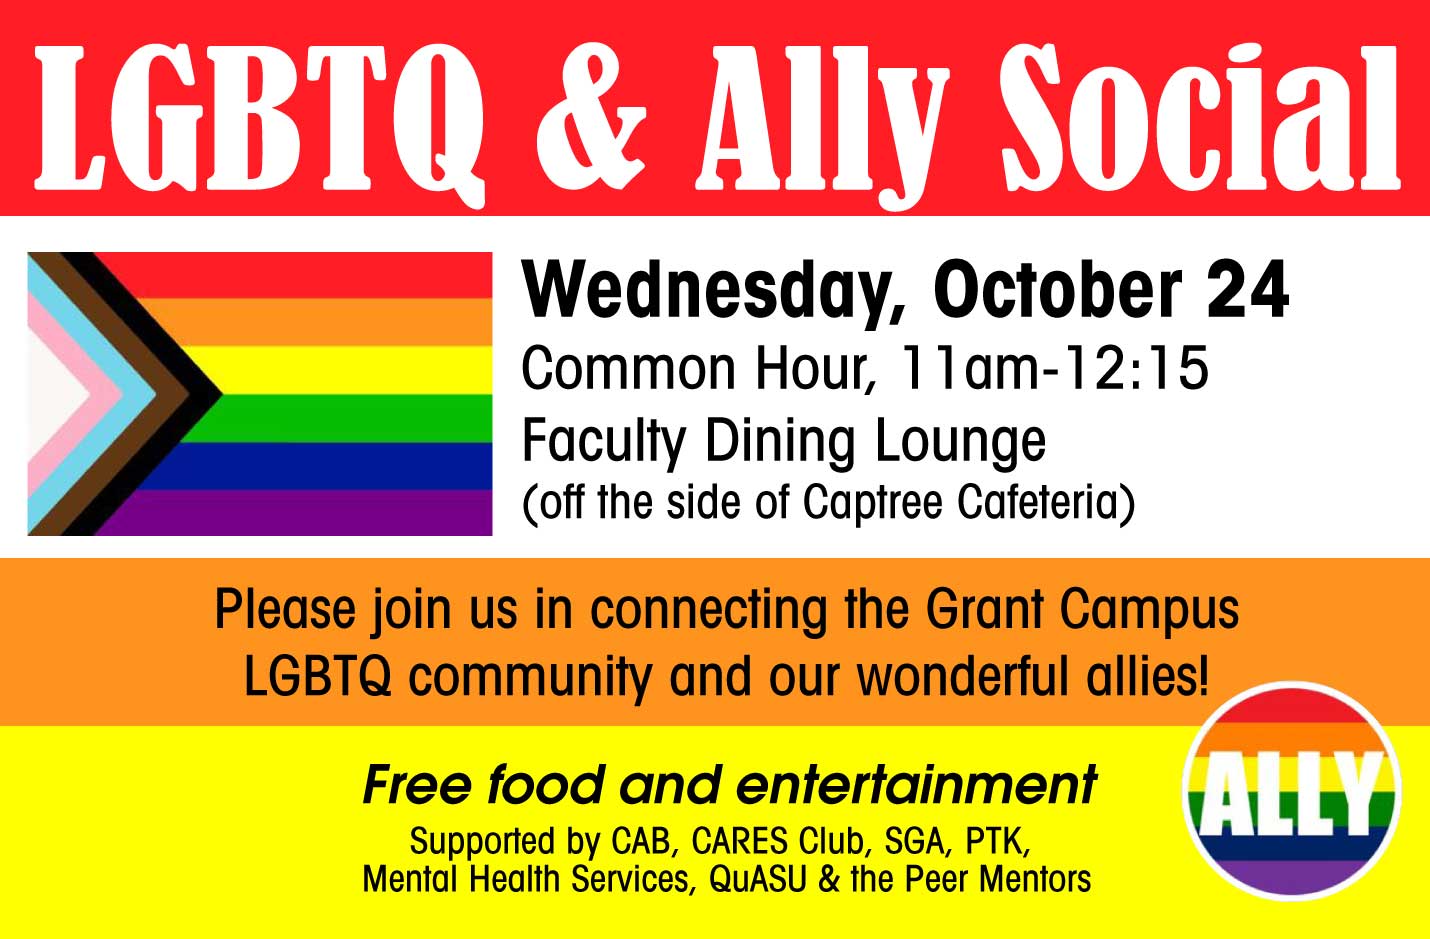 LGBT and Ally Social - October 24, 2018 Event Flyer